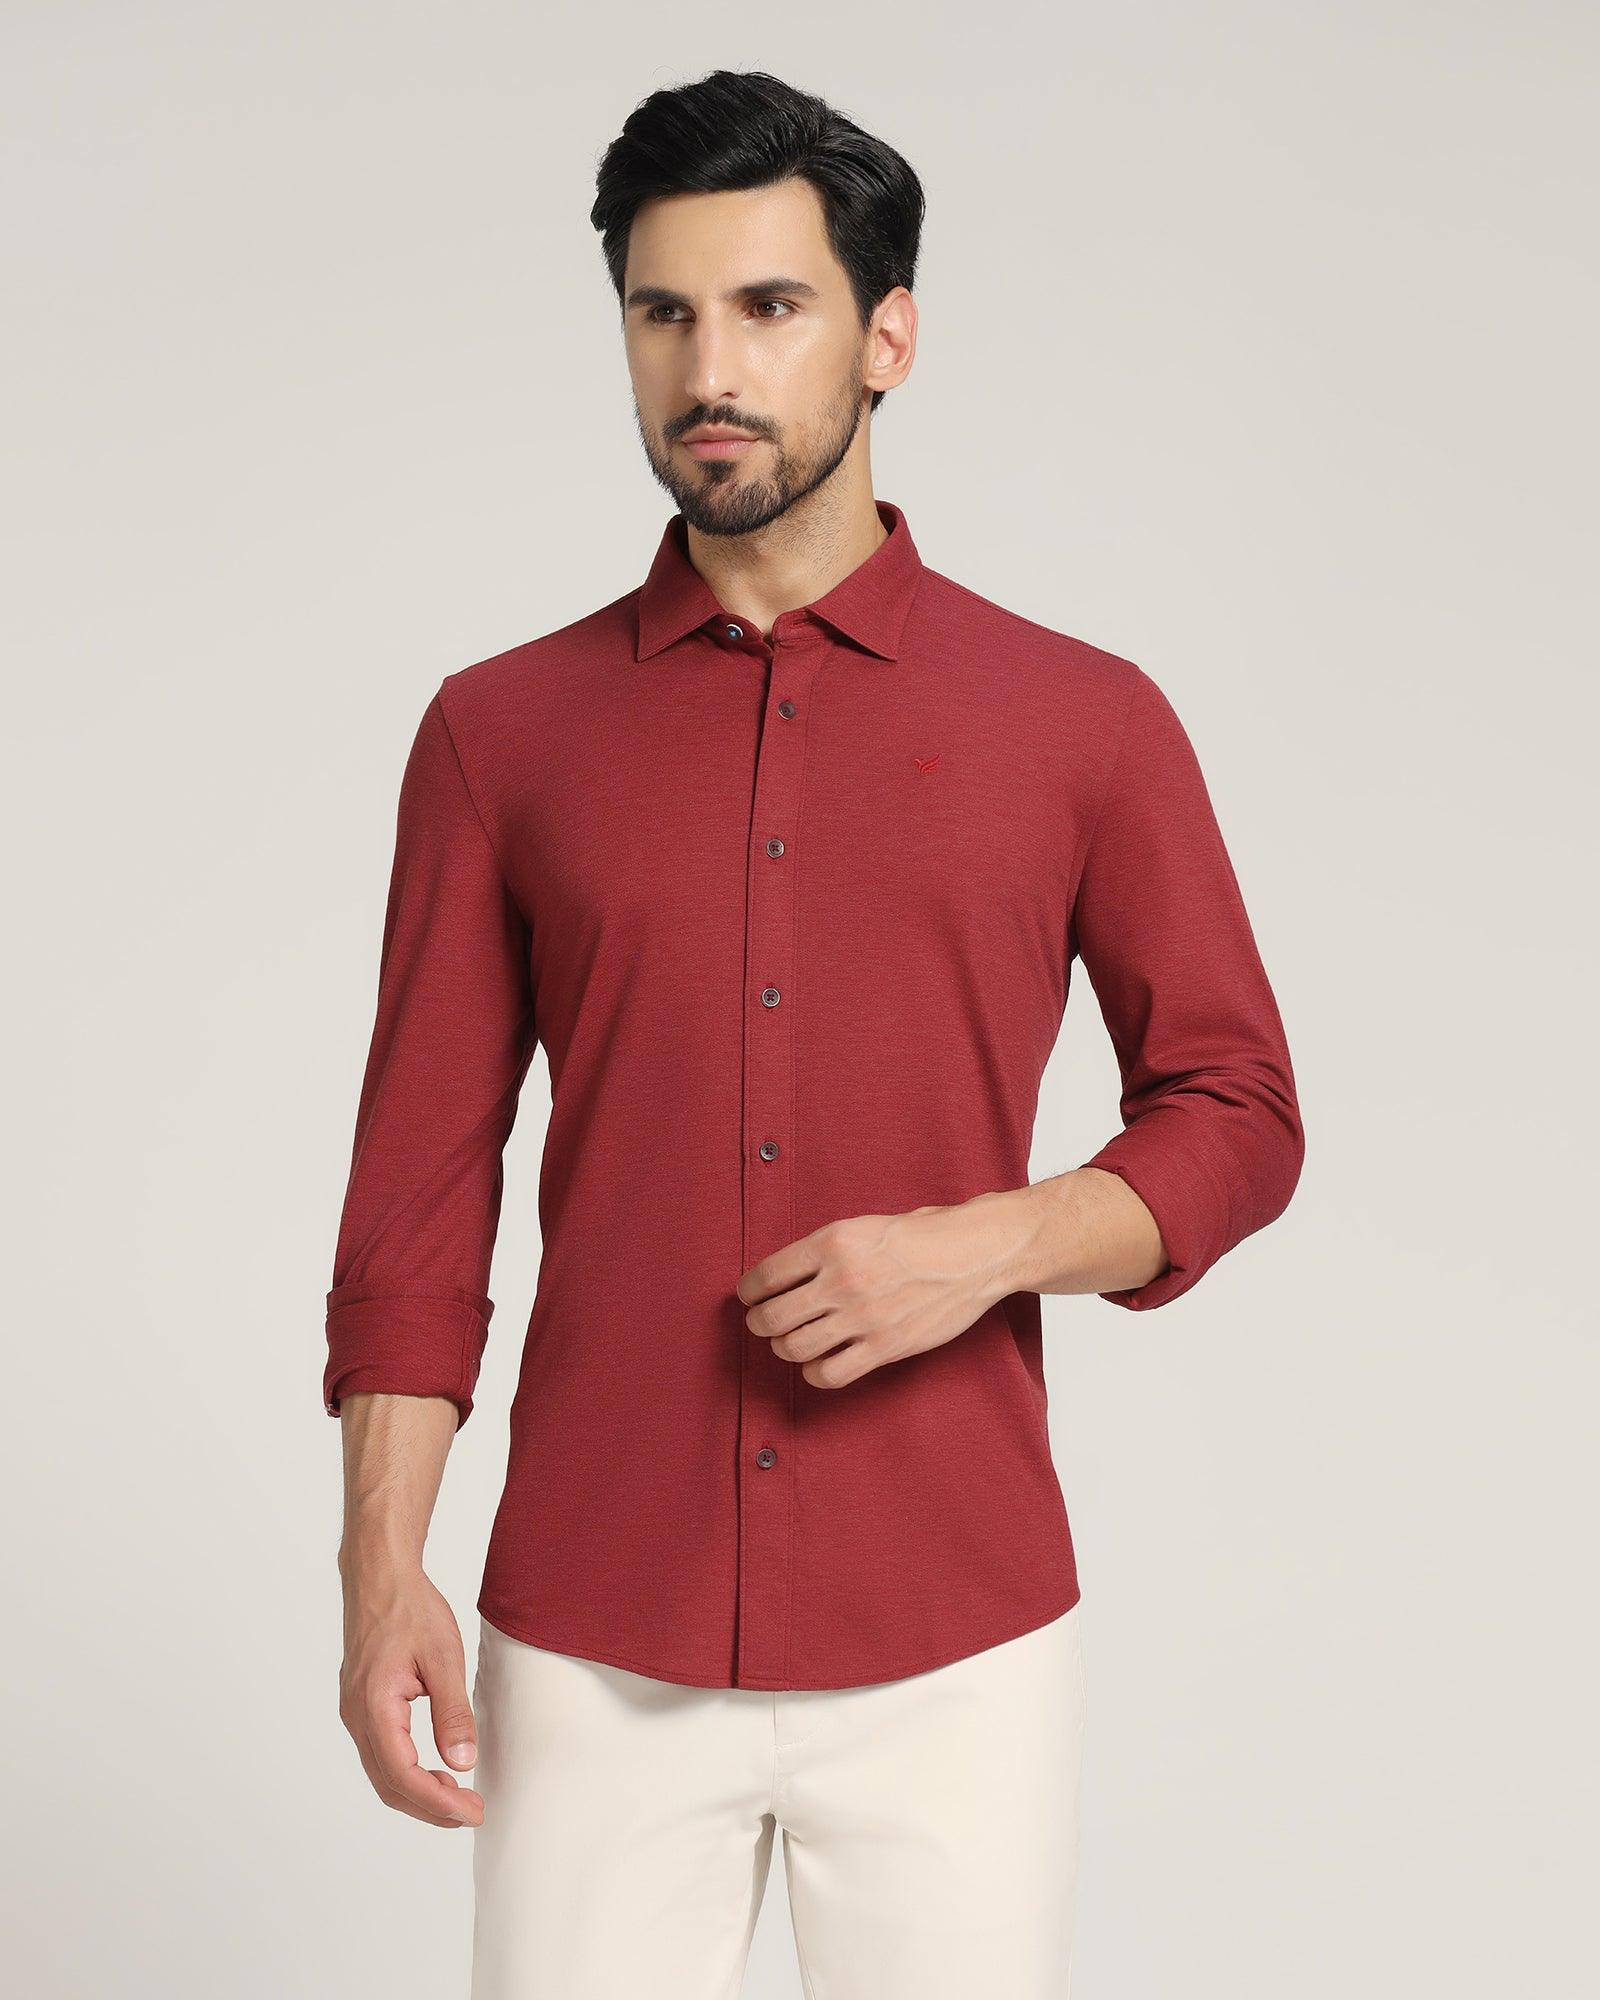 Solid Stretch Shirt  Maroon Slim Fit Cotton Shirt for Men – Senses India